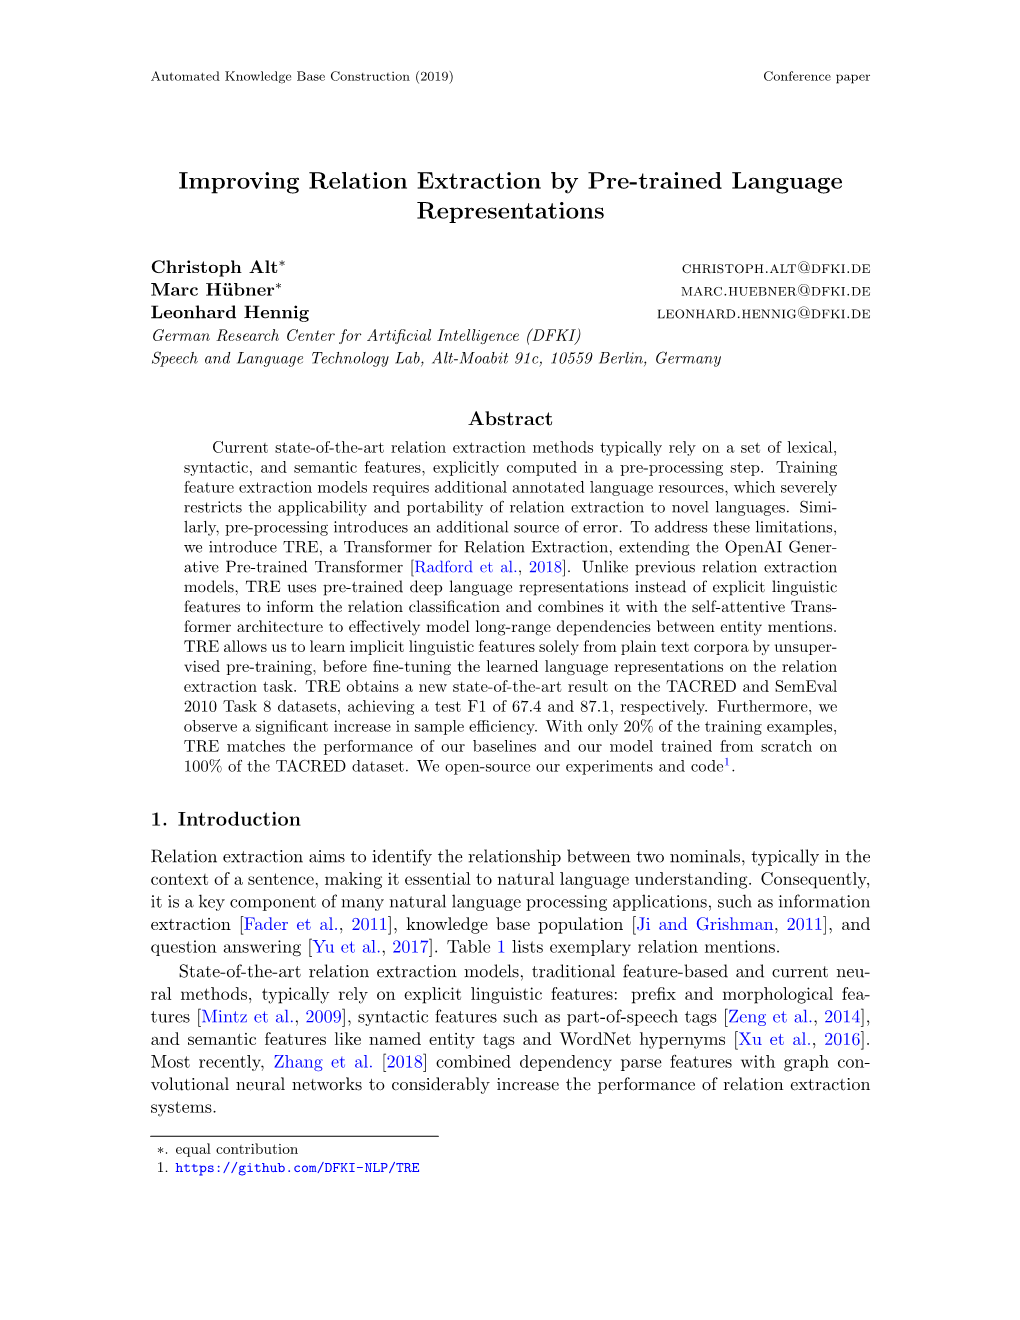 Improving Relation Extraction by Pre-Trained Language Representations